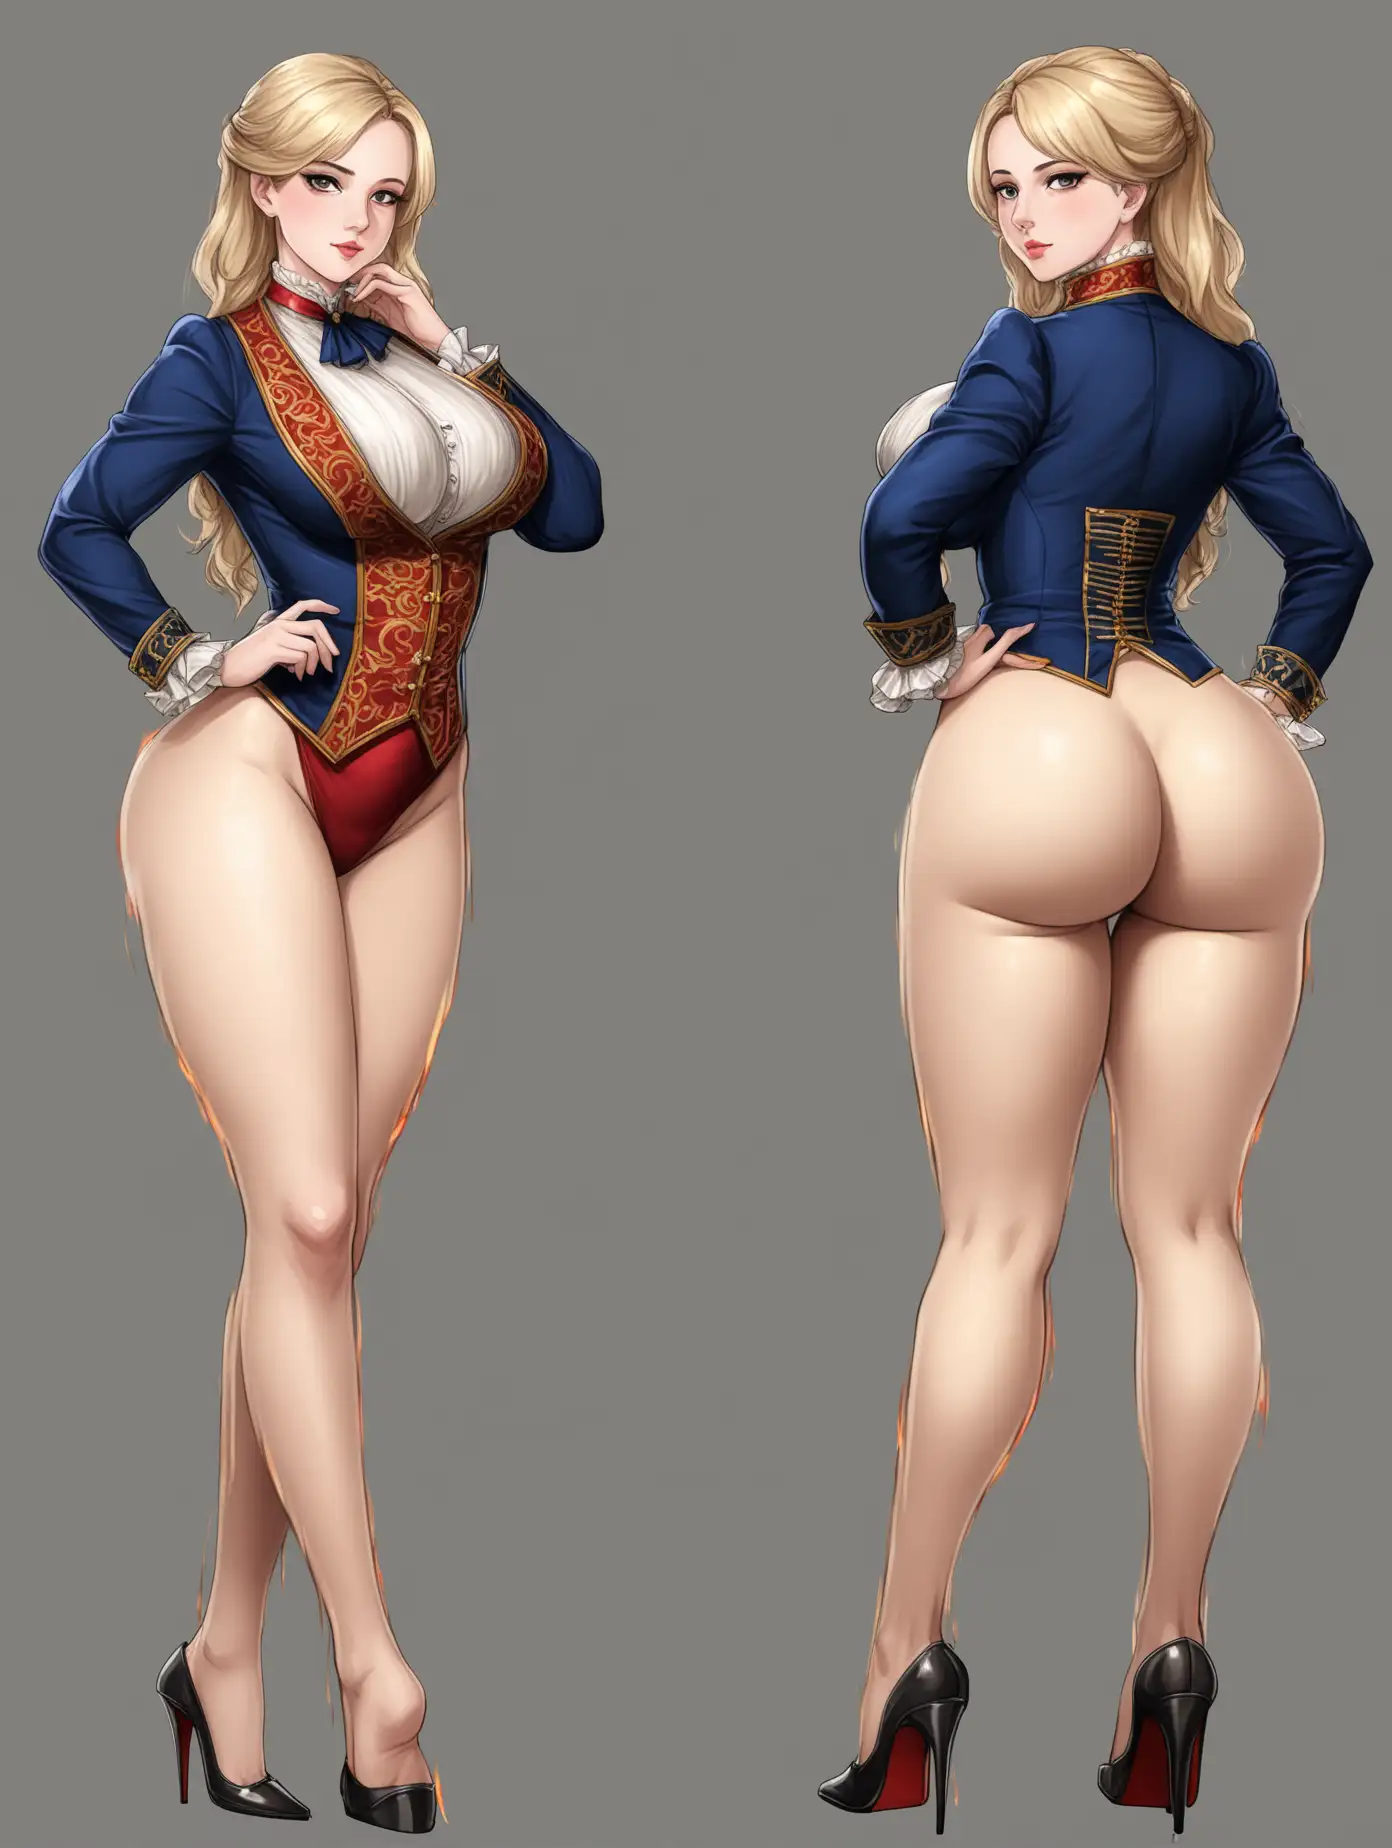 Sensual picture of a hot girl, age 30, big ass, aristocrat outfit, 2 poses, full body